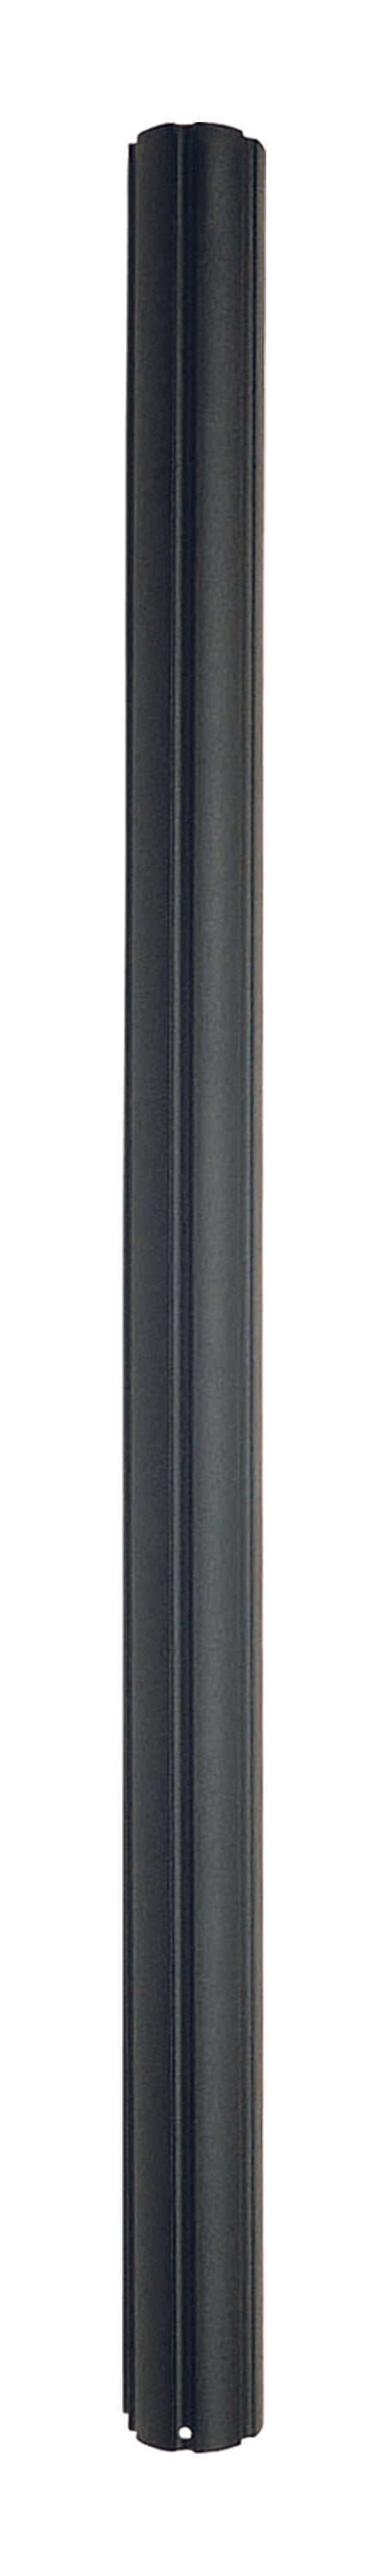 4 PK 84" Burial Pole with Photo Cell